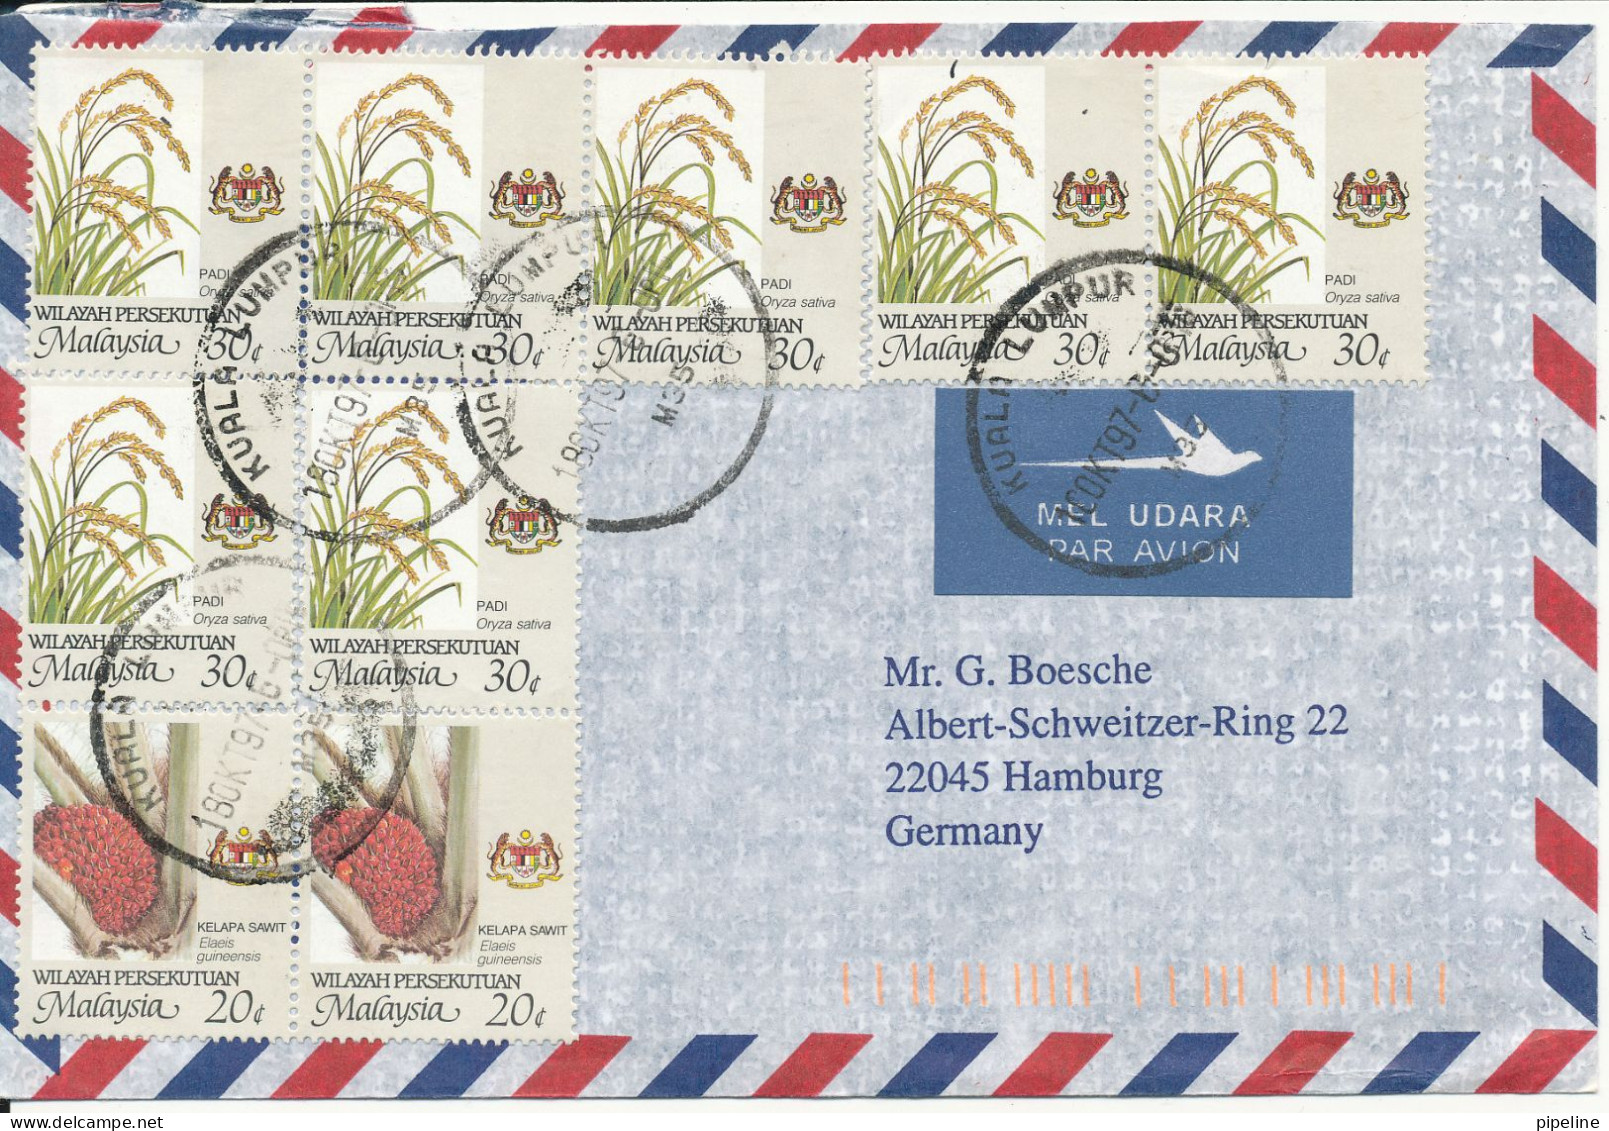 Malaysia Wilayah Persekutuan Air Mail Cover Sent To Germany 18-10-1997 - Malaysia (1964-...)